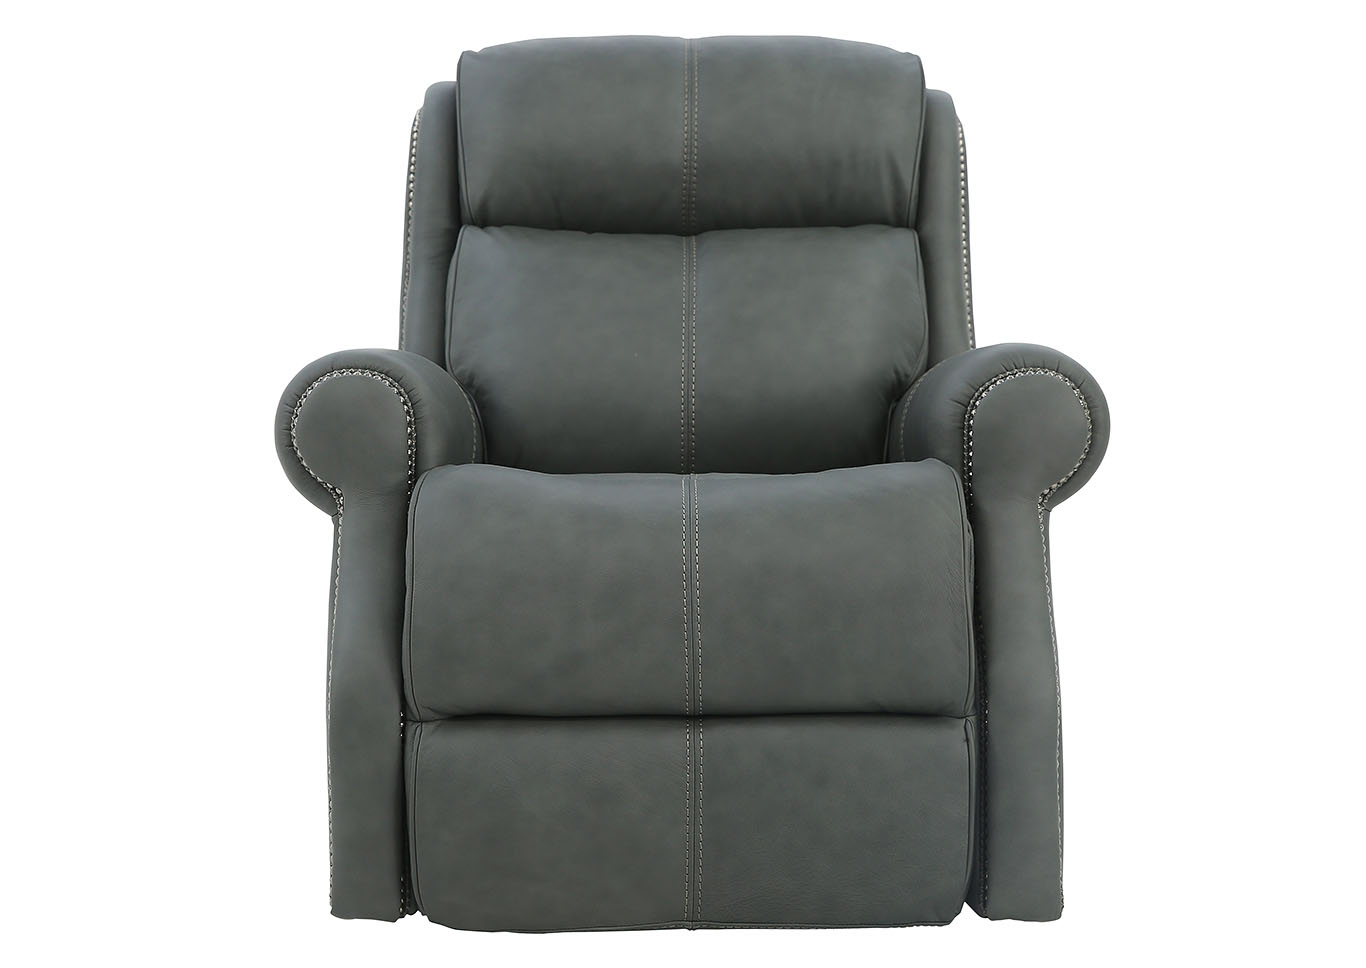 MCGWIRE GRAY LEATHER POWER RECLINER